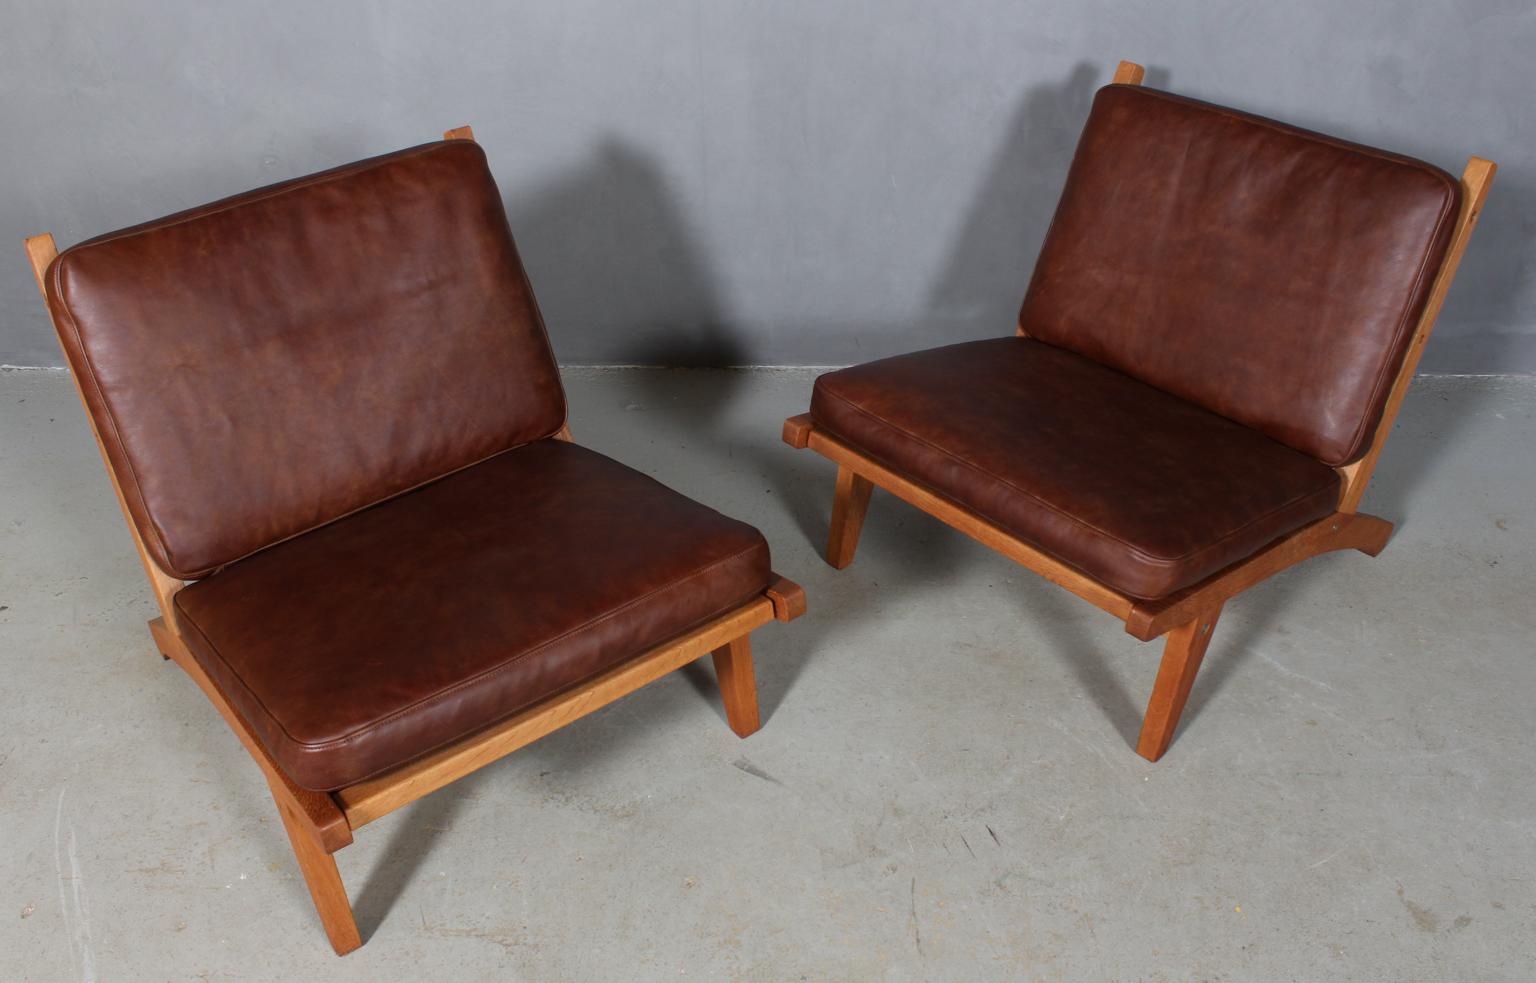 Hans J. Wegner pair of lounge chair with loose cushions new upholstered with brown aniline leather.

Frame of oak.

Model GE-370, made by GETAMA.